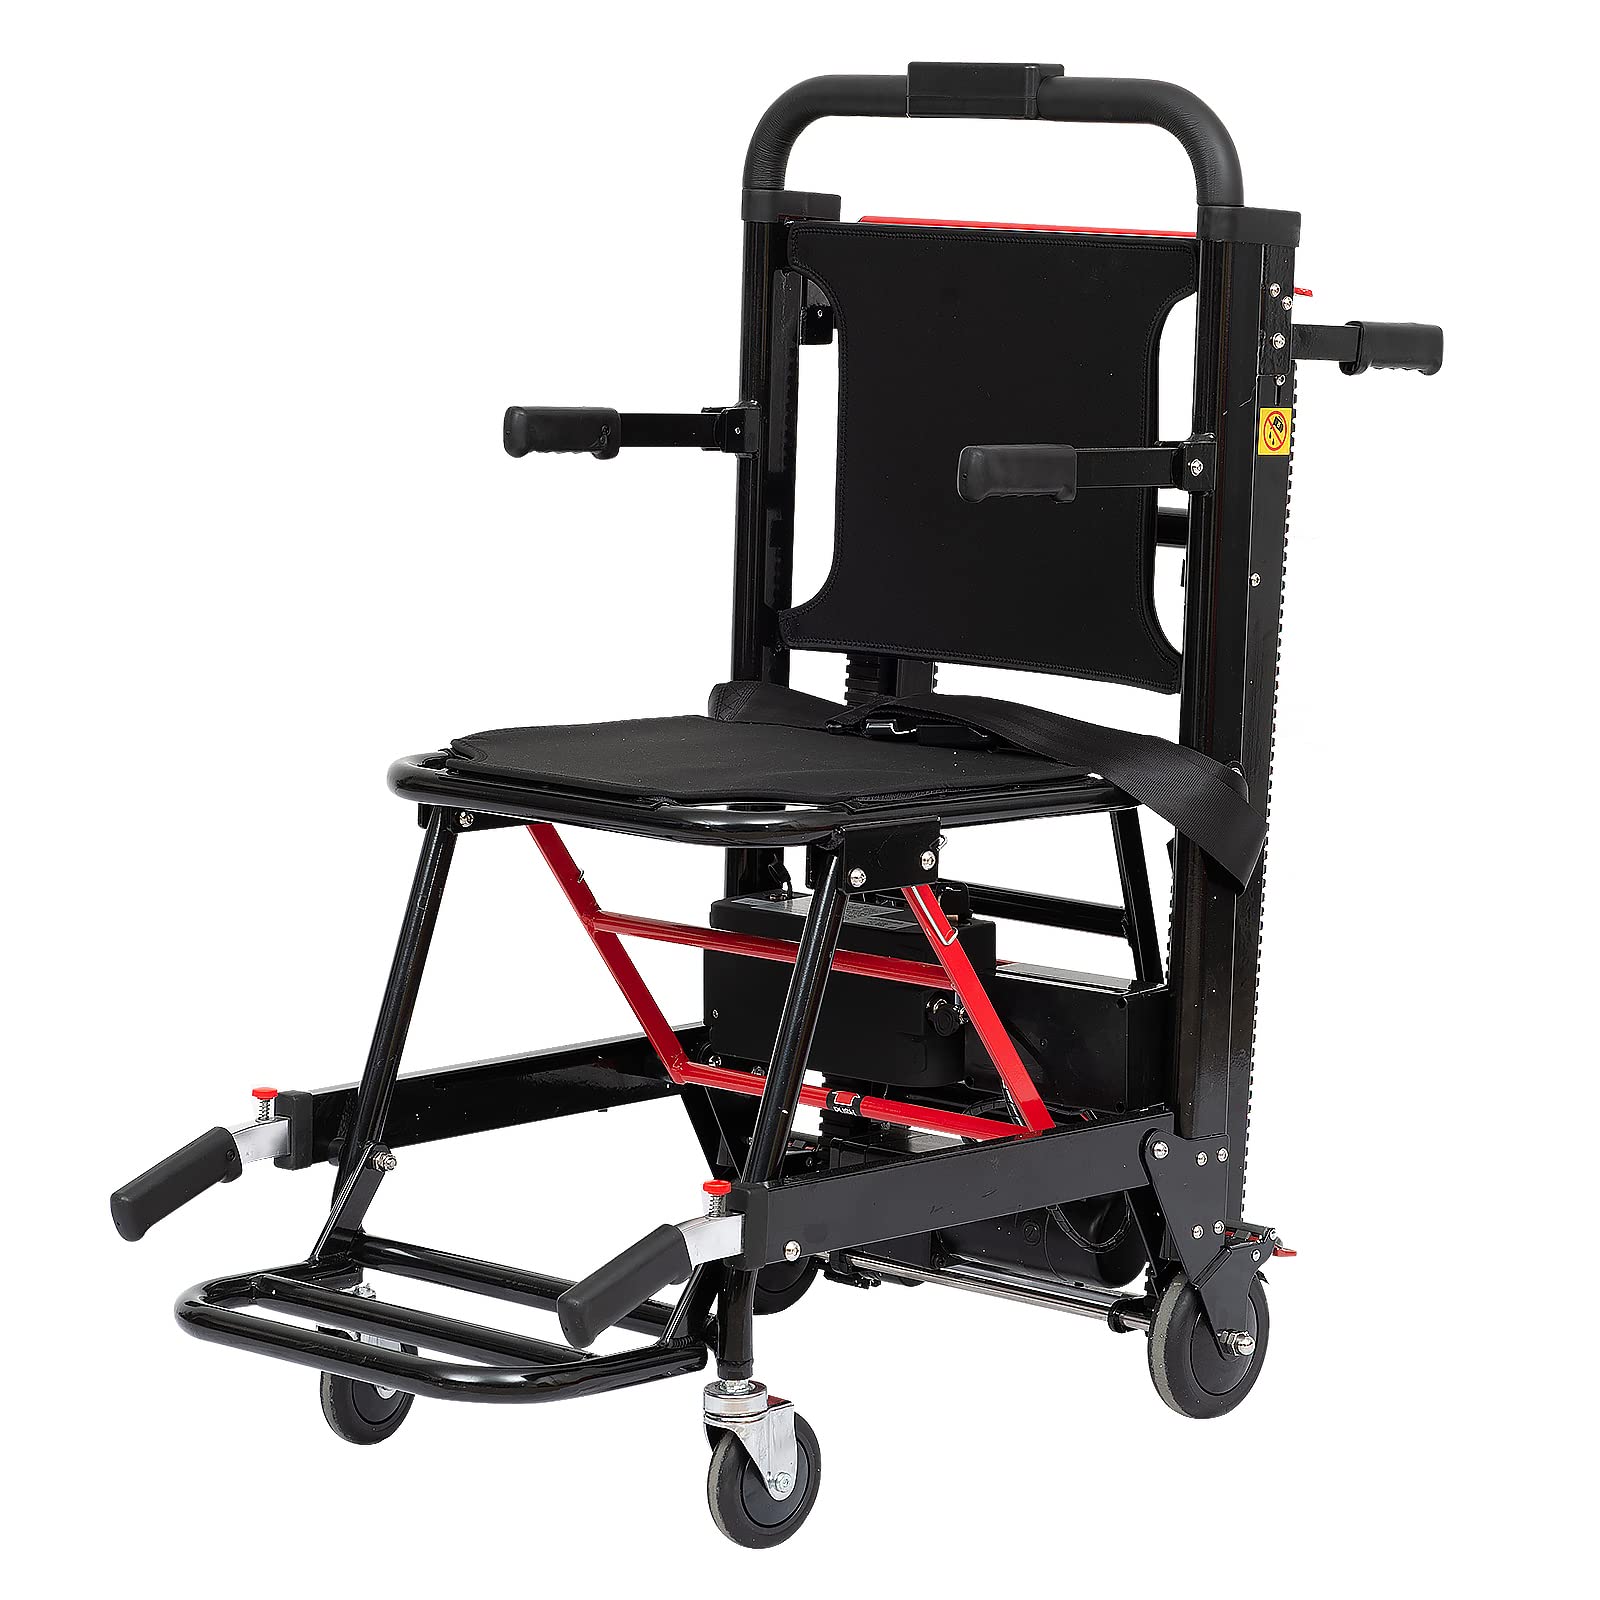 YFFSOW stǎir clím-bińg Wheelchair, Foldable stǎir lǐft nùrsing Care Tool, Daily Living Auxiliary Home Elevator, No Installation Required, Easy to use